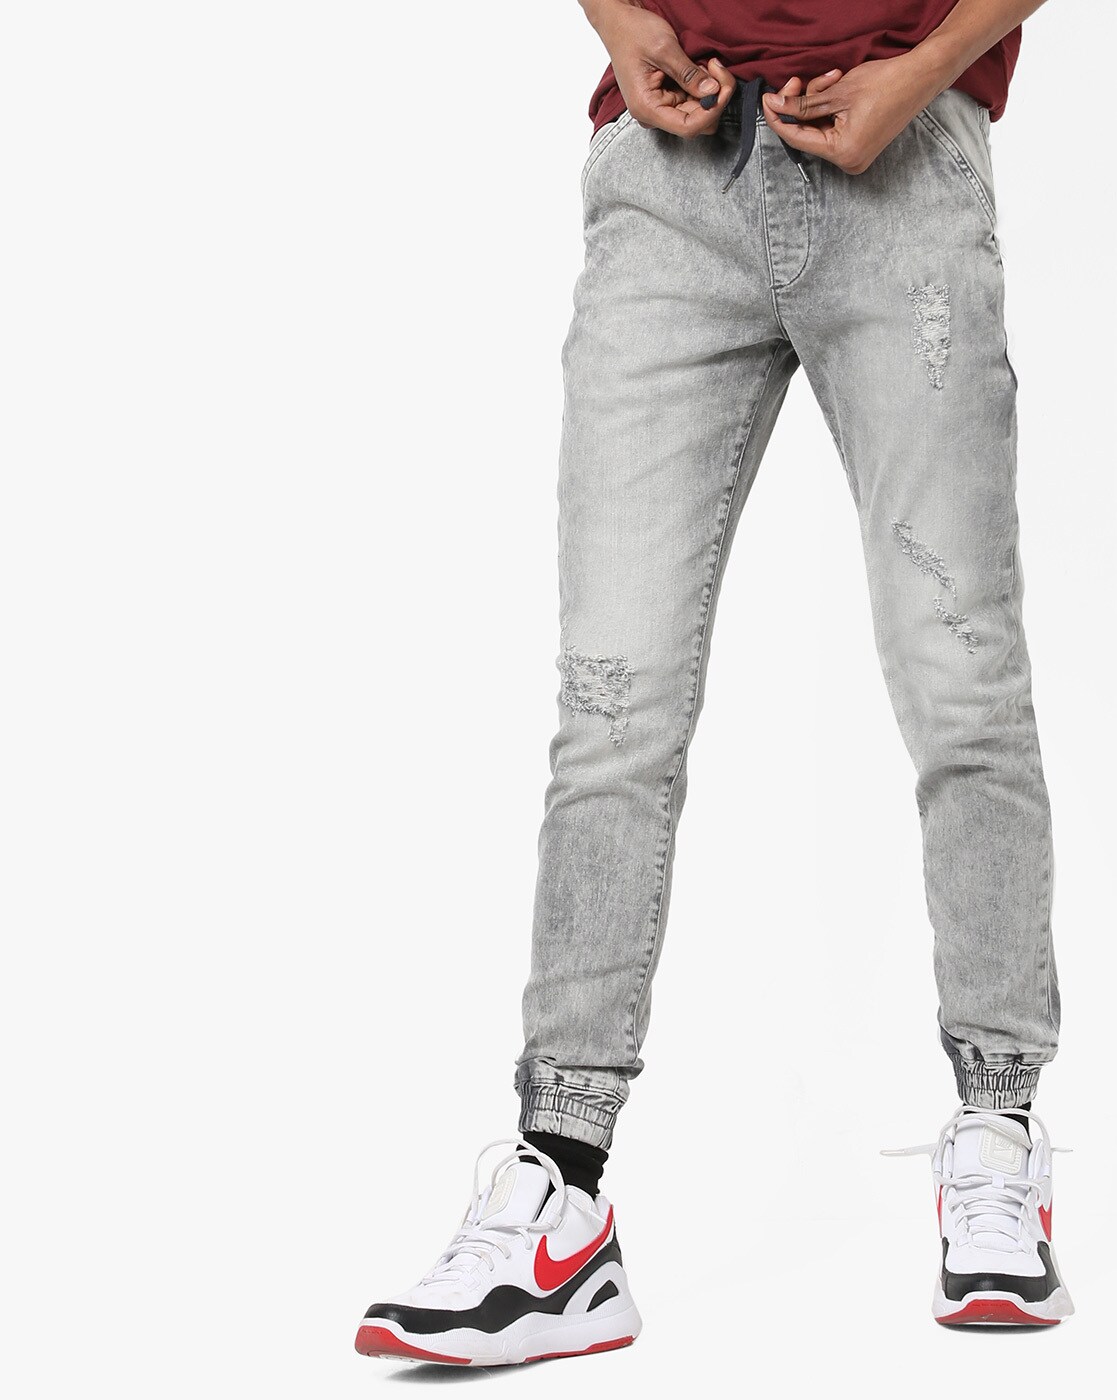 joggers jeans under 500